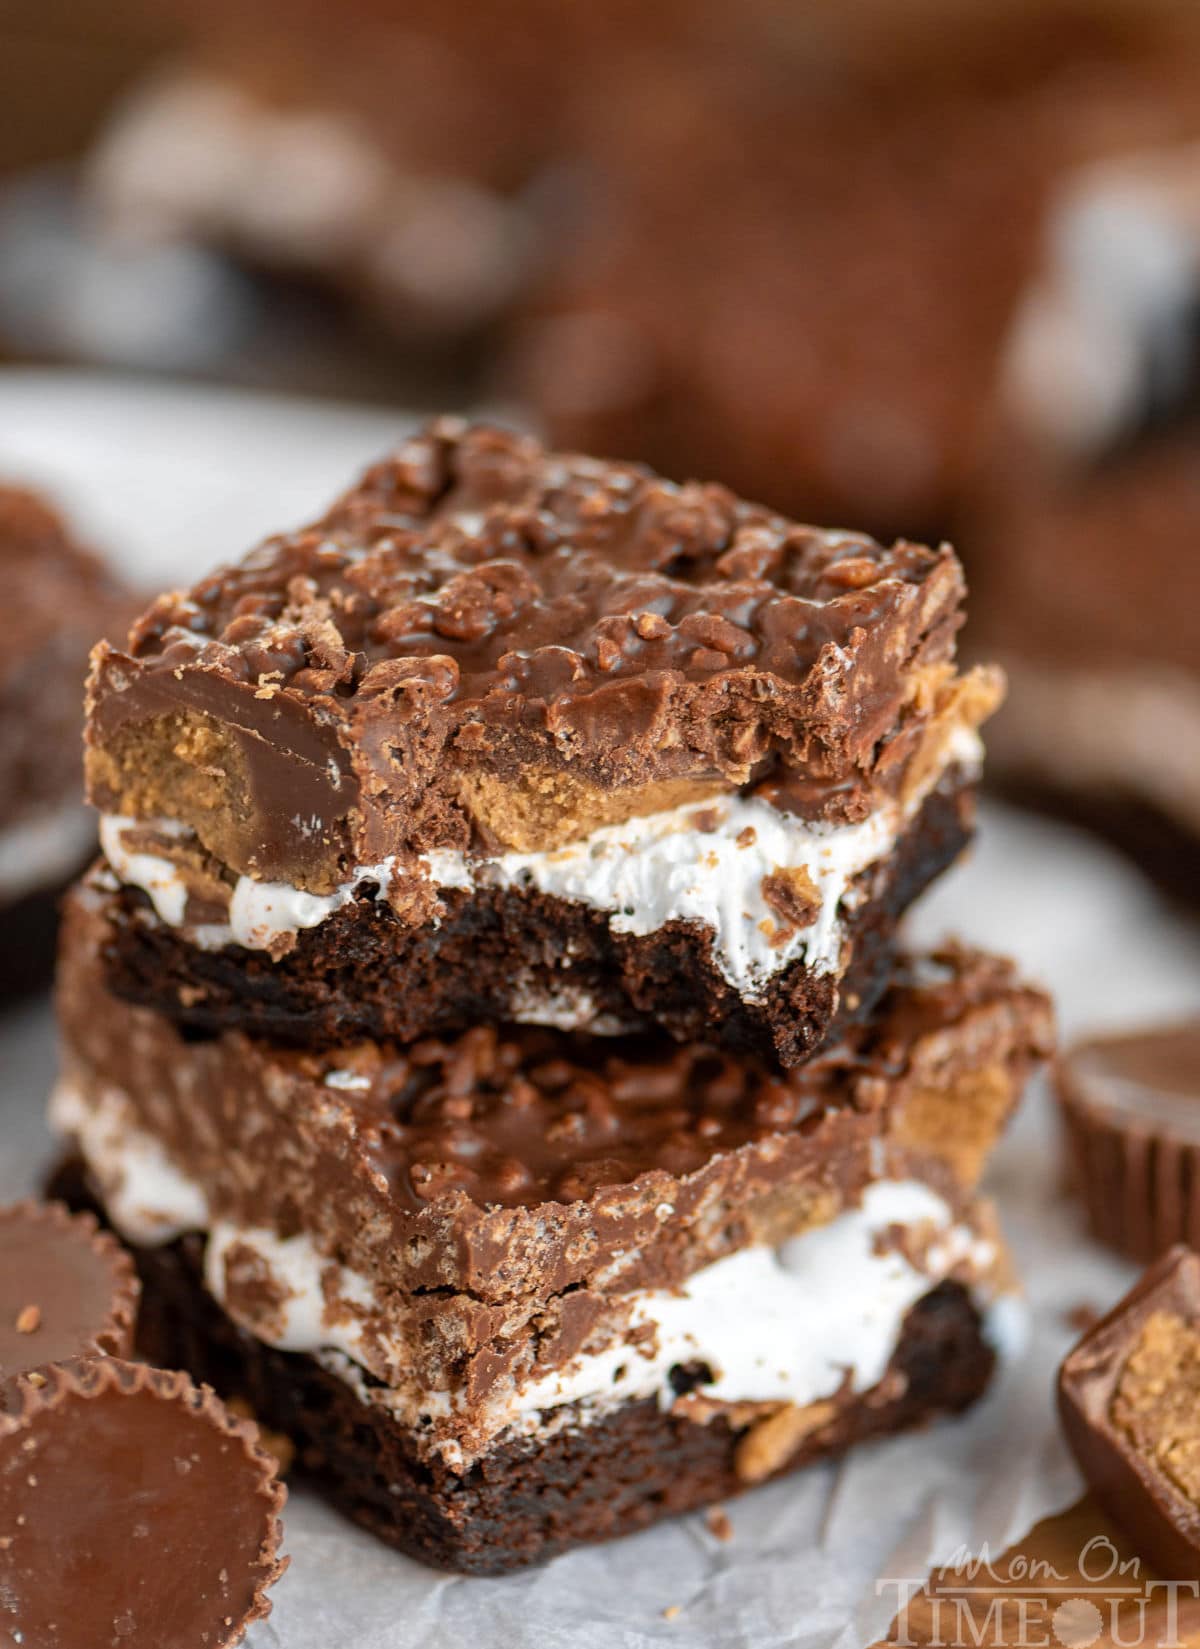 Two brownies with multiple layers including marshmallow, Reese's candy, and a crunch peanut butter chocolate layer stacked on each other. The top brownie has a bite taken out of it.